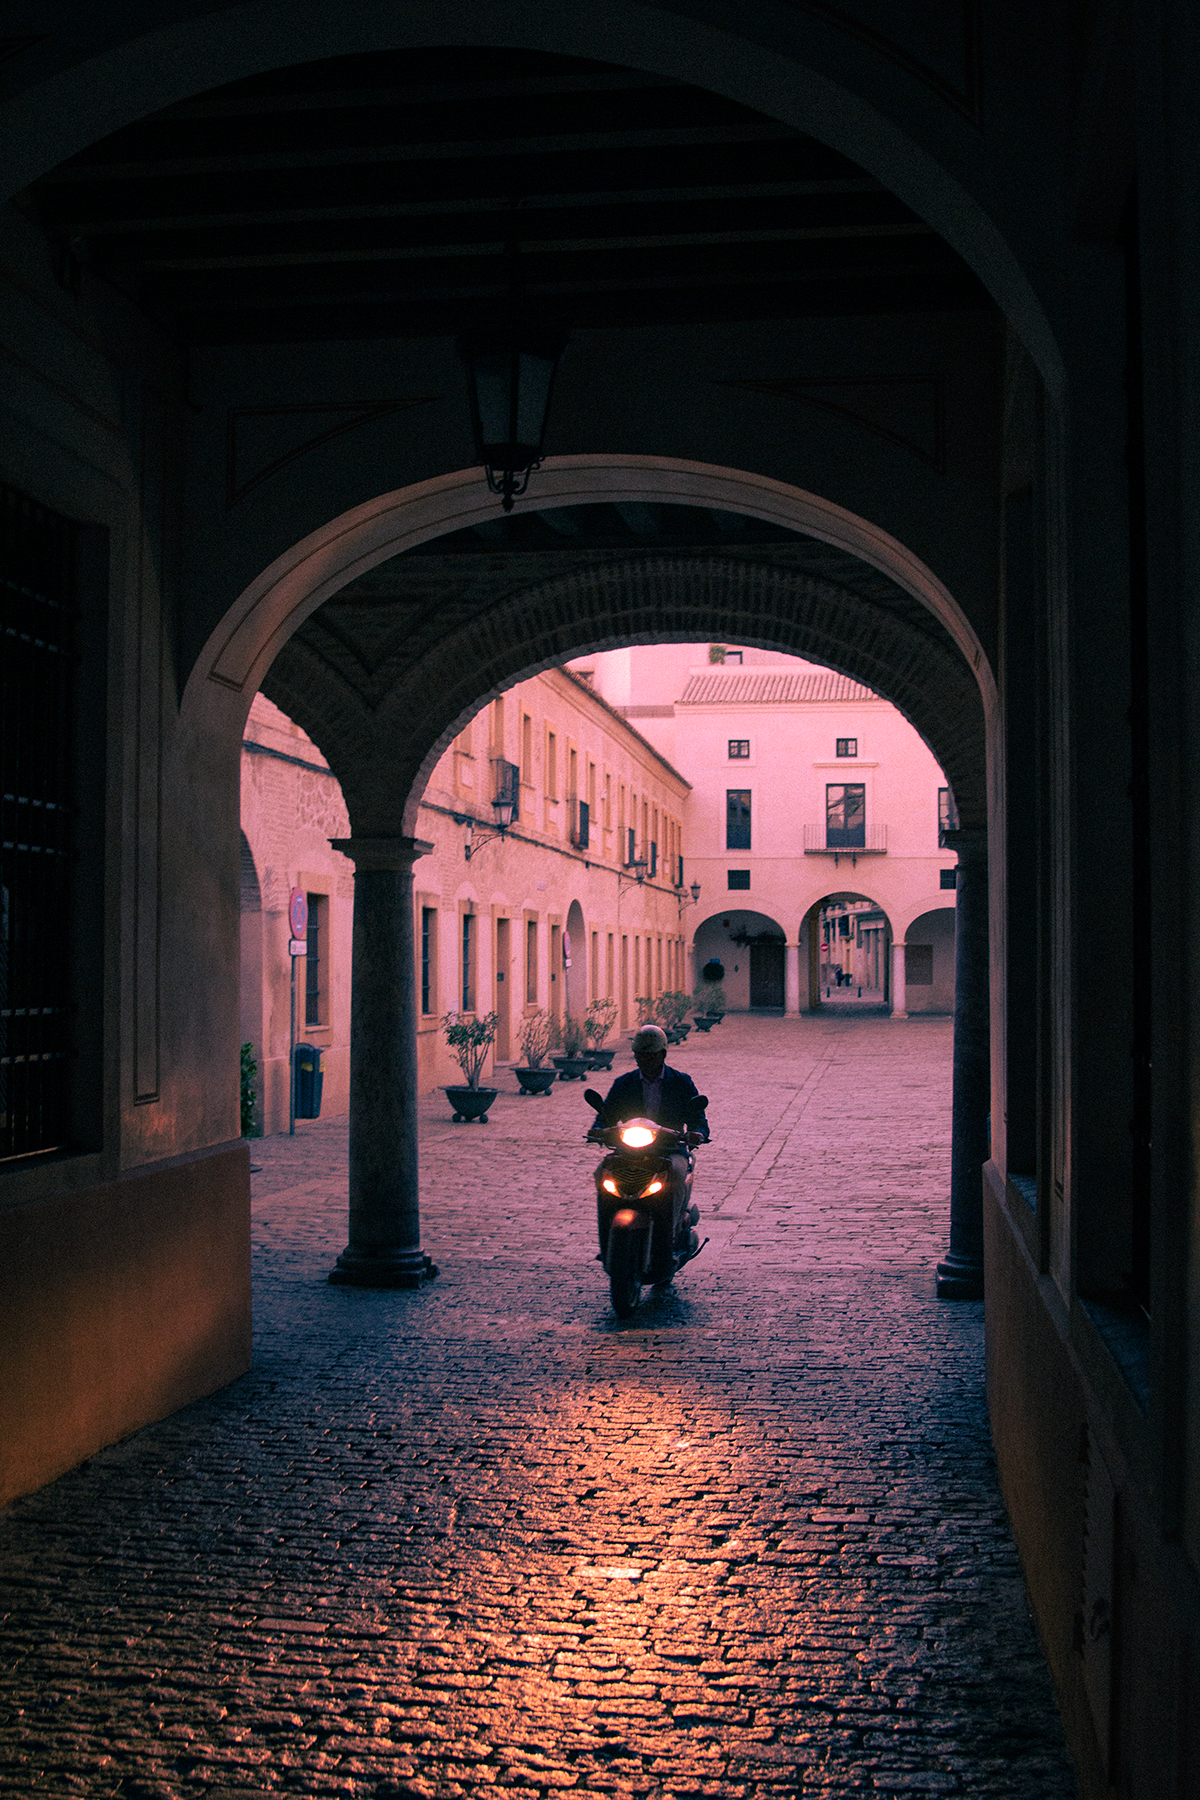 A motorcyclist rides past us on a stone road.